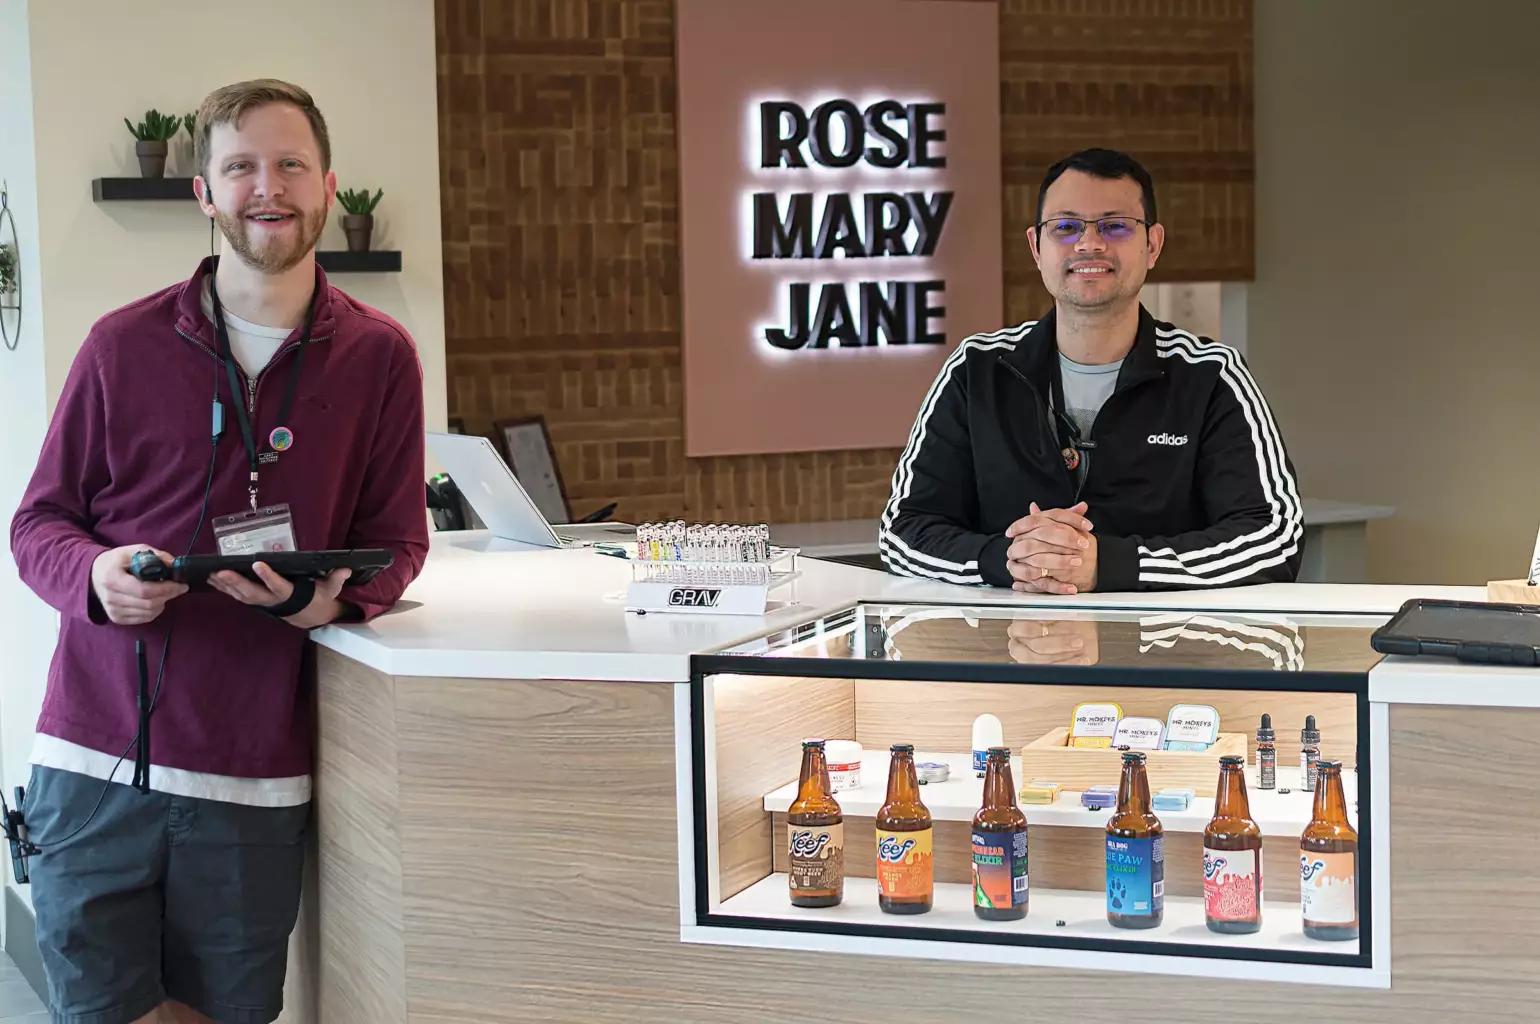 Rose Mary Jane - Portland Old Port: Things To Do in Portland, Maine